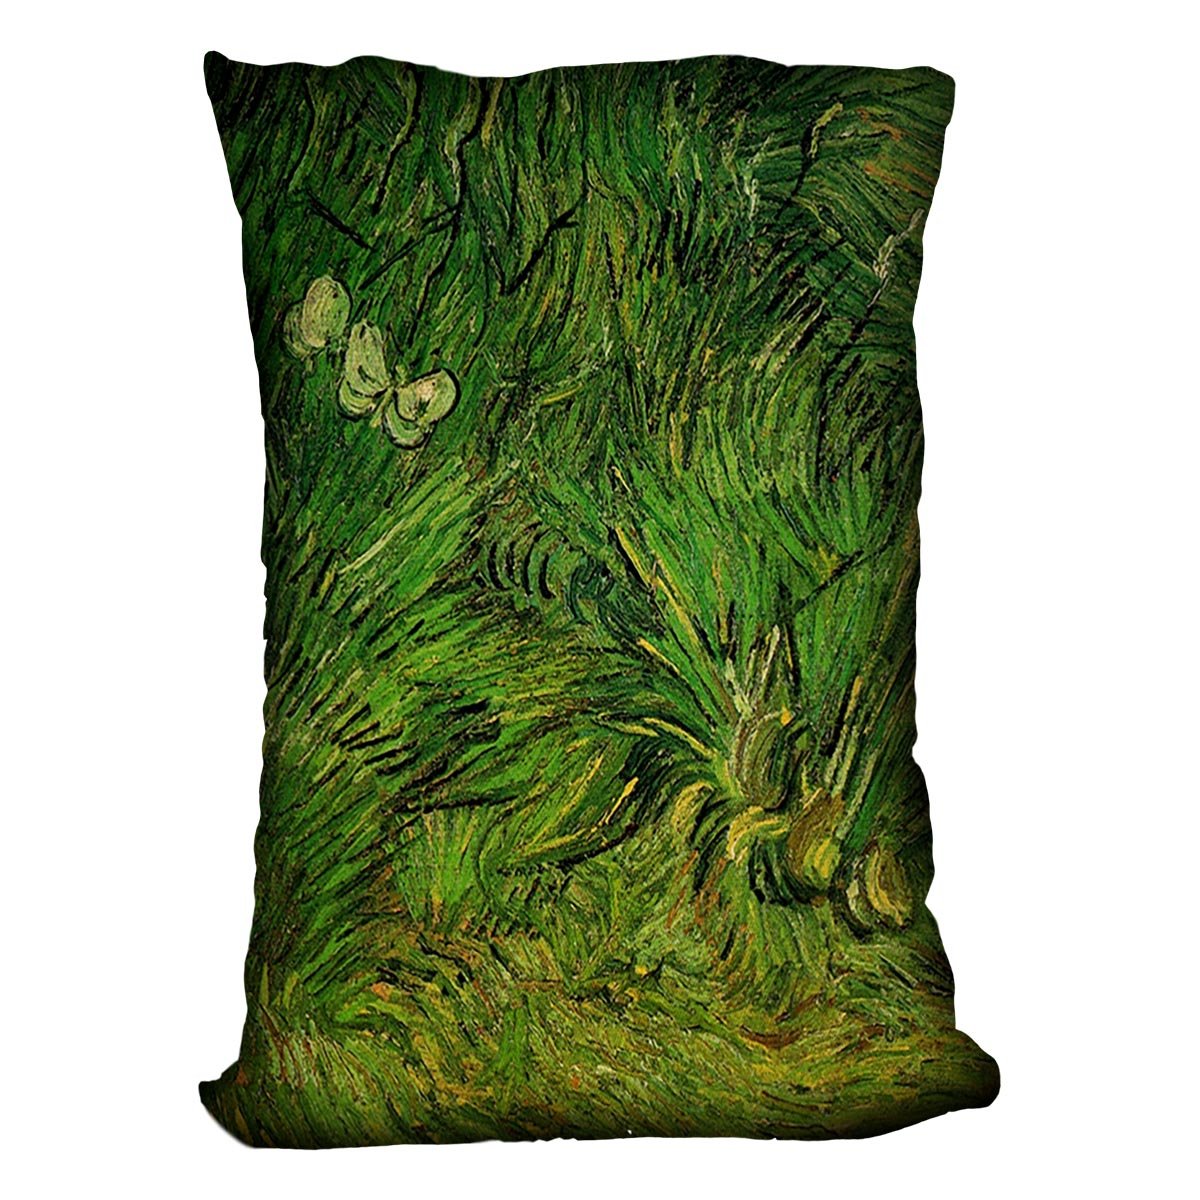 Two White Butterflies by Van Gogh Throw Pillow